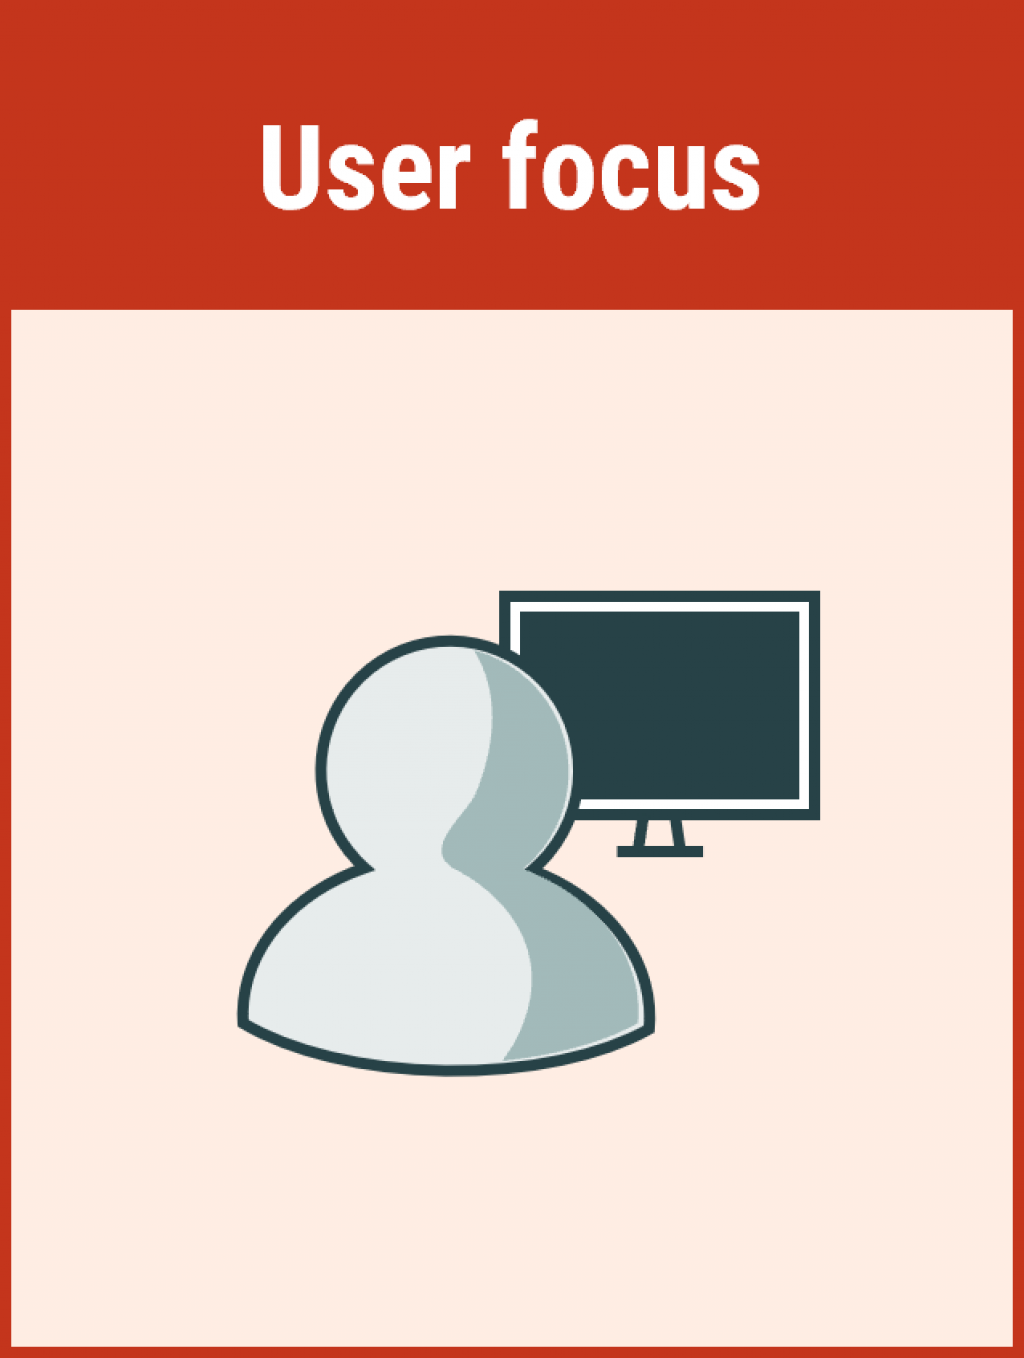 Models should be as simple as possible to meet user needs, and should be easily understood by different user groups. Illustration of a person viewed from behind, looking at a screen. 